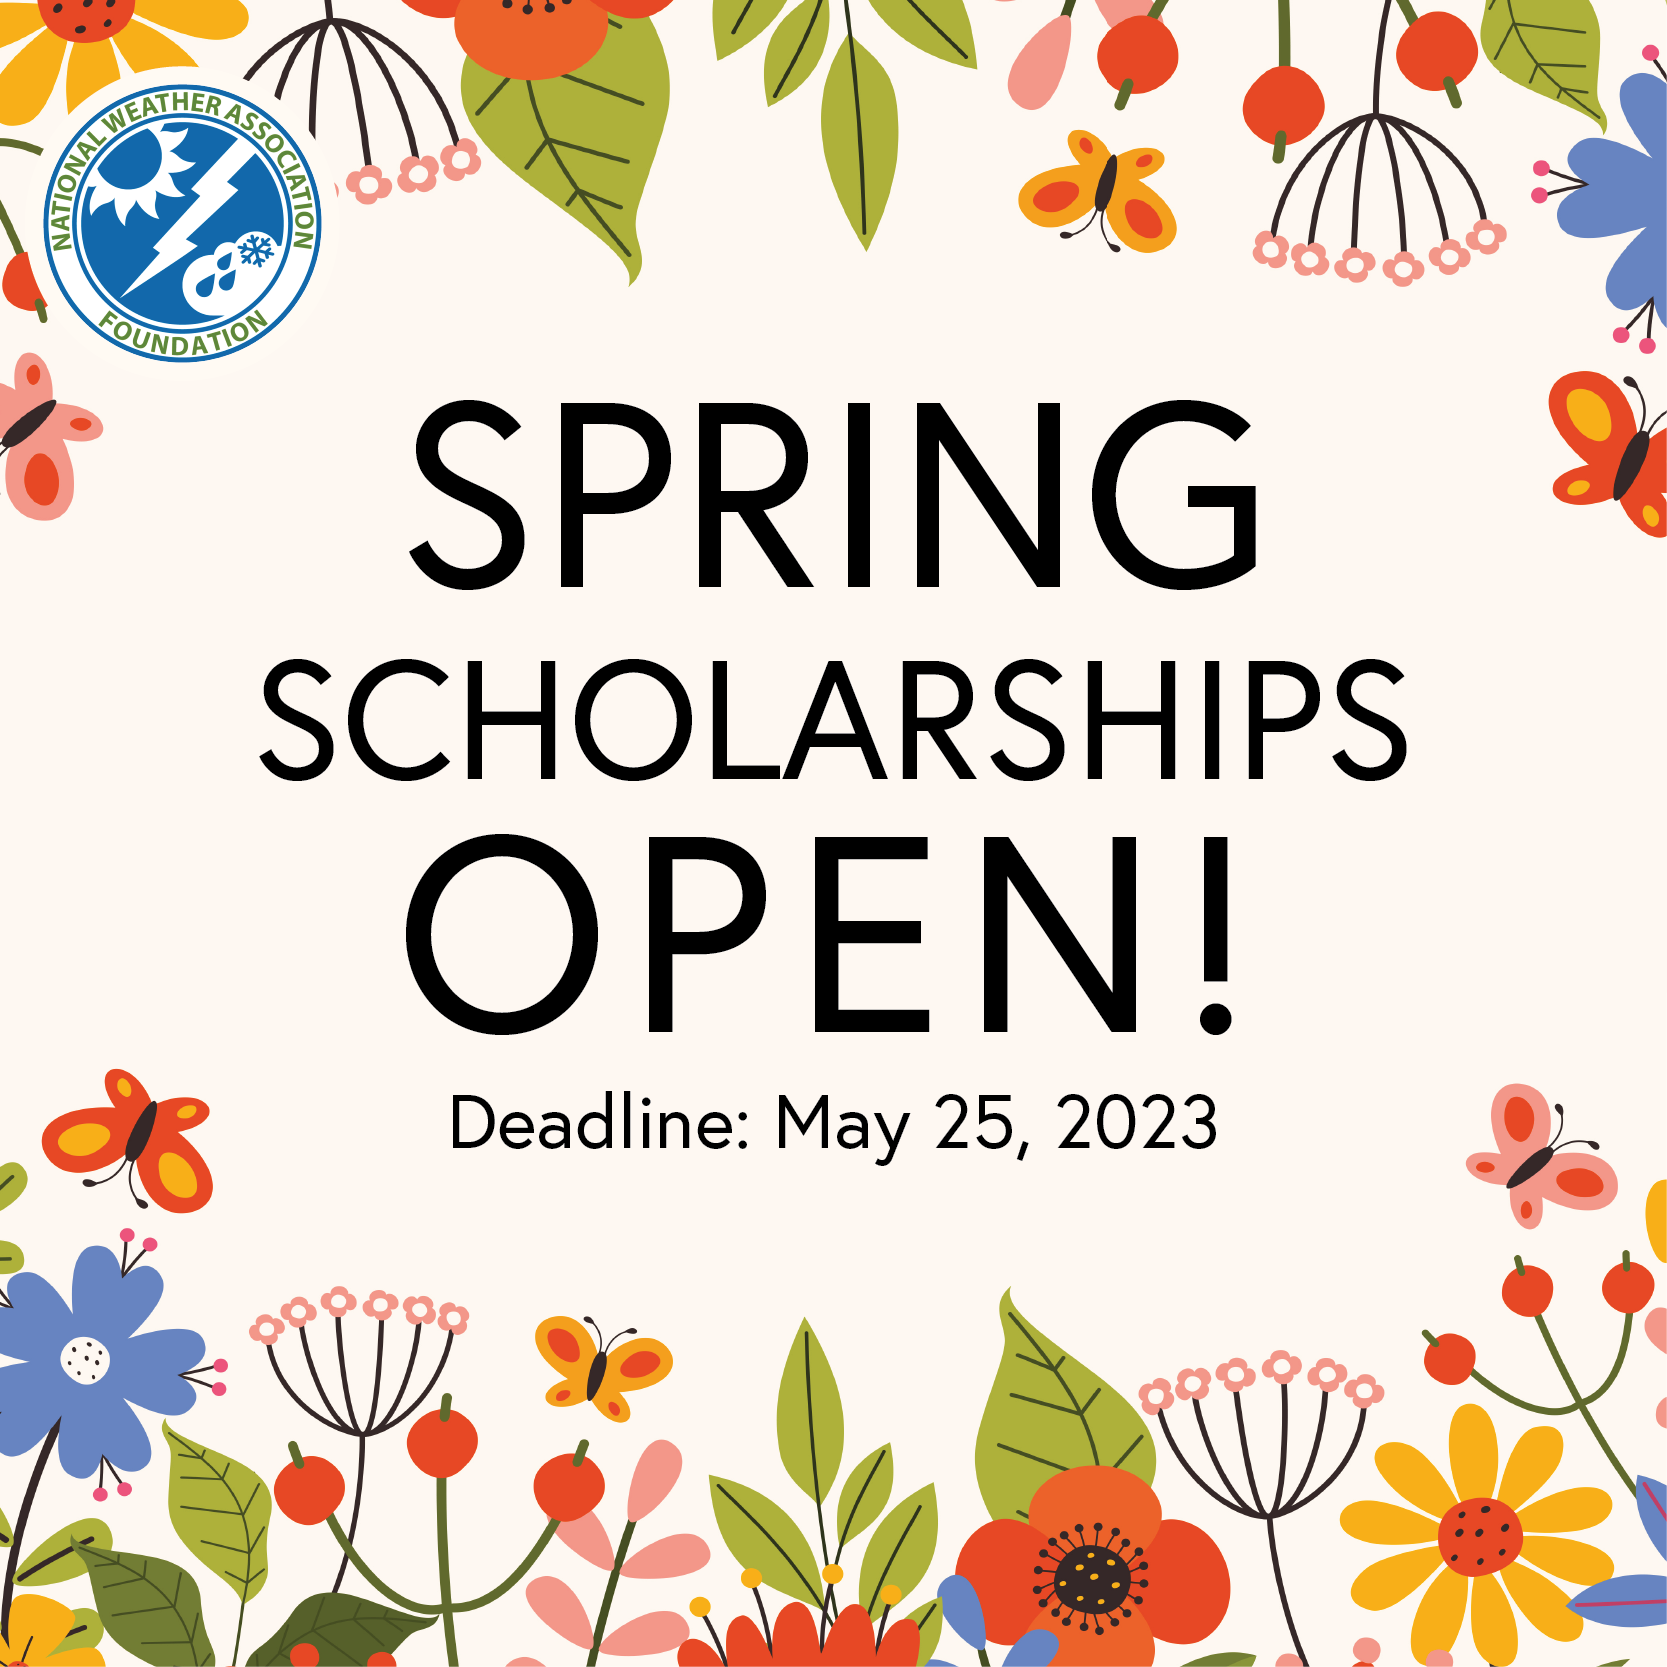 Spring Scholarships Deadline is may 25, 2023.